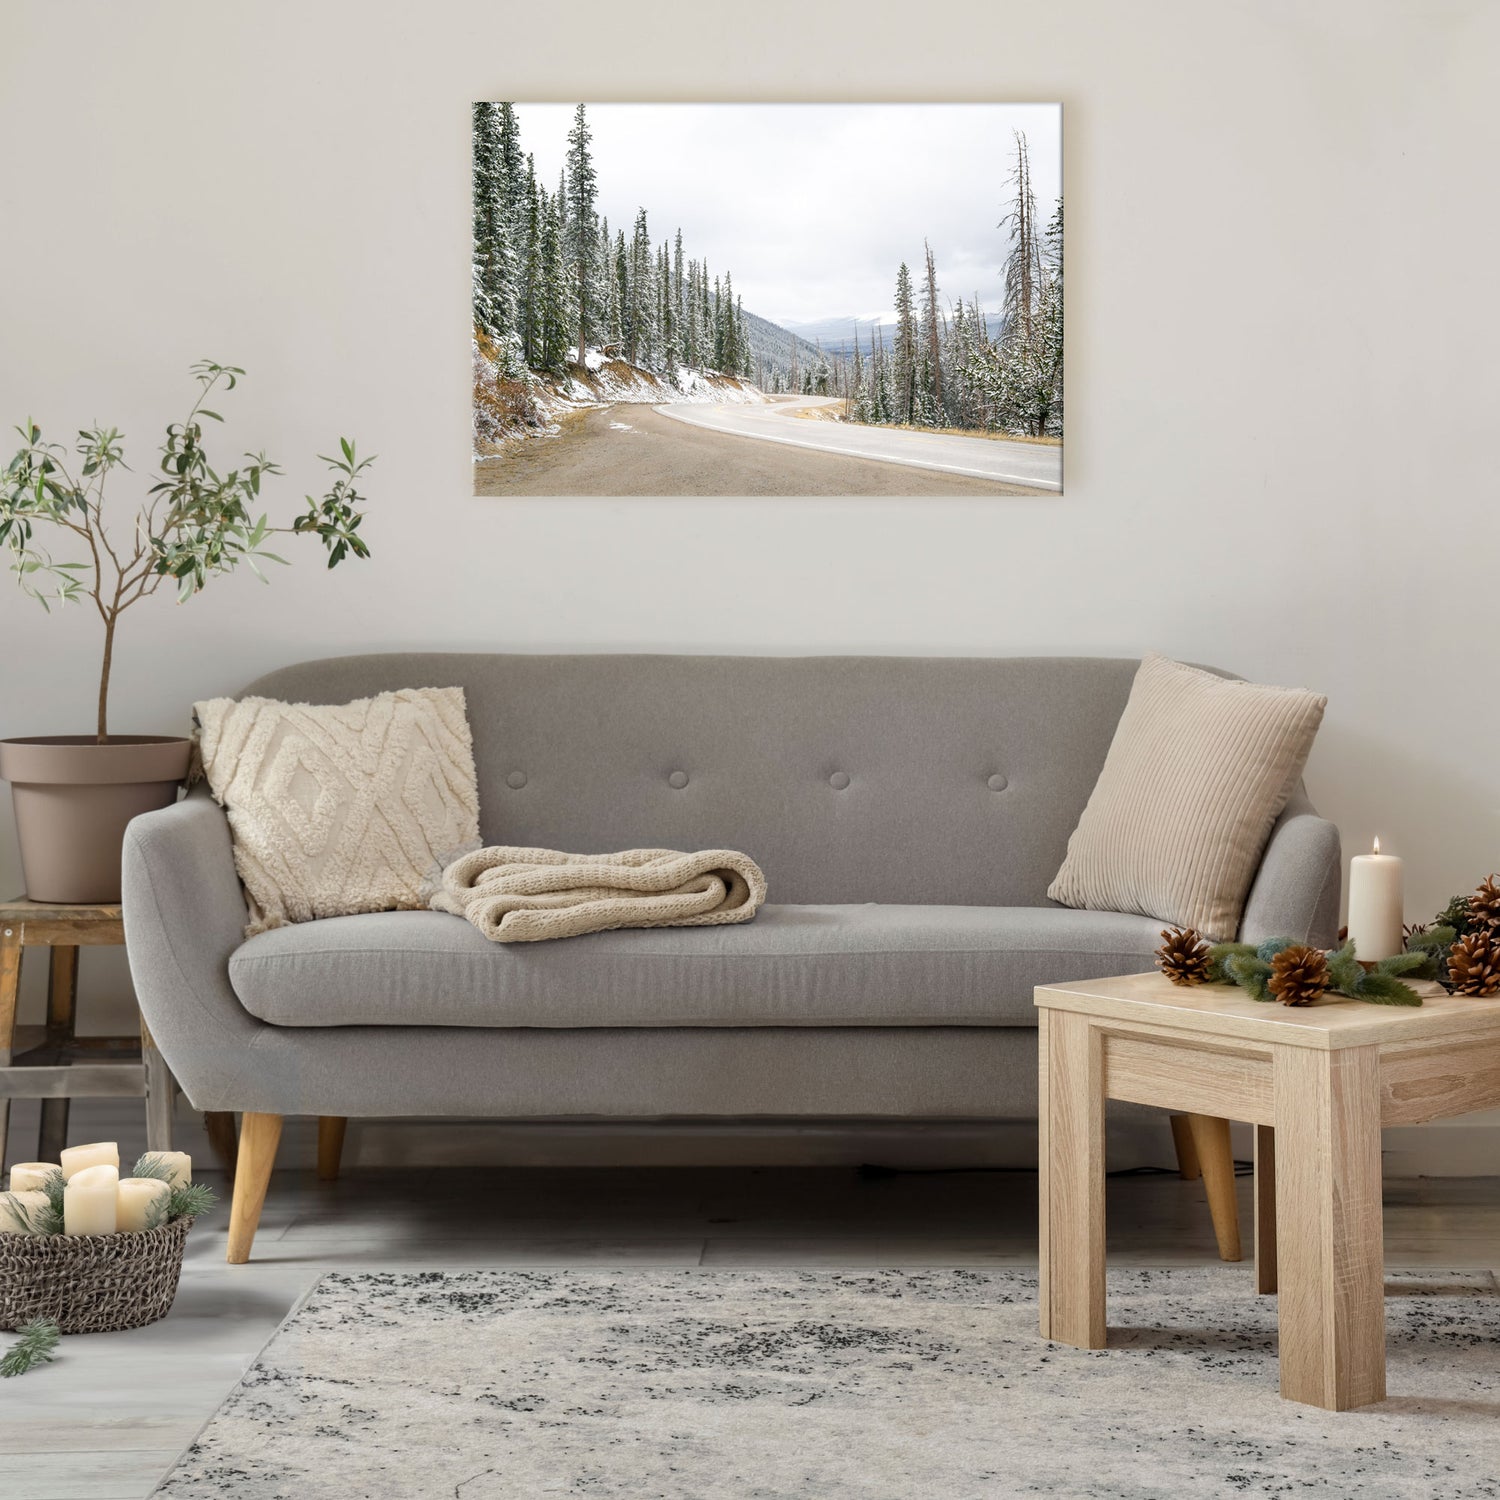 Colorado winter canvas wall art featuring a snow covered mountain pass